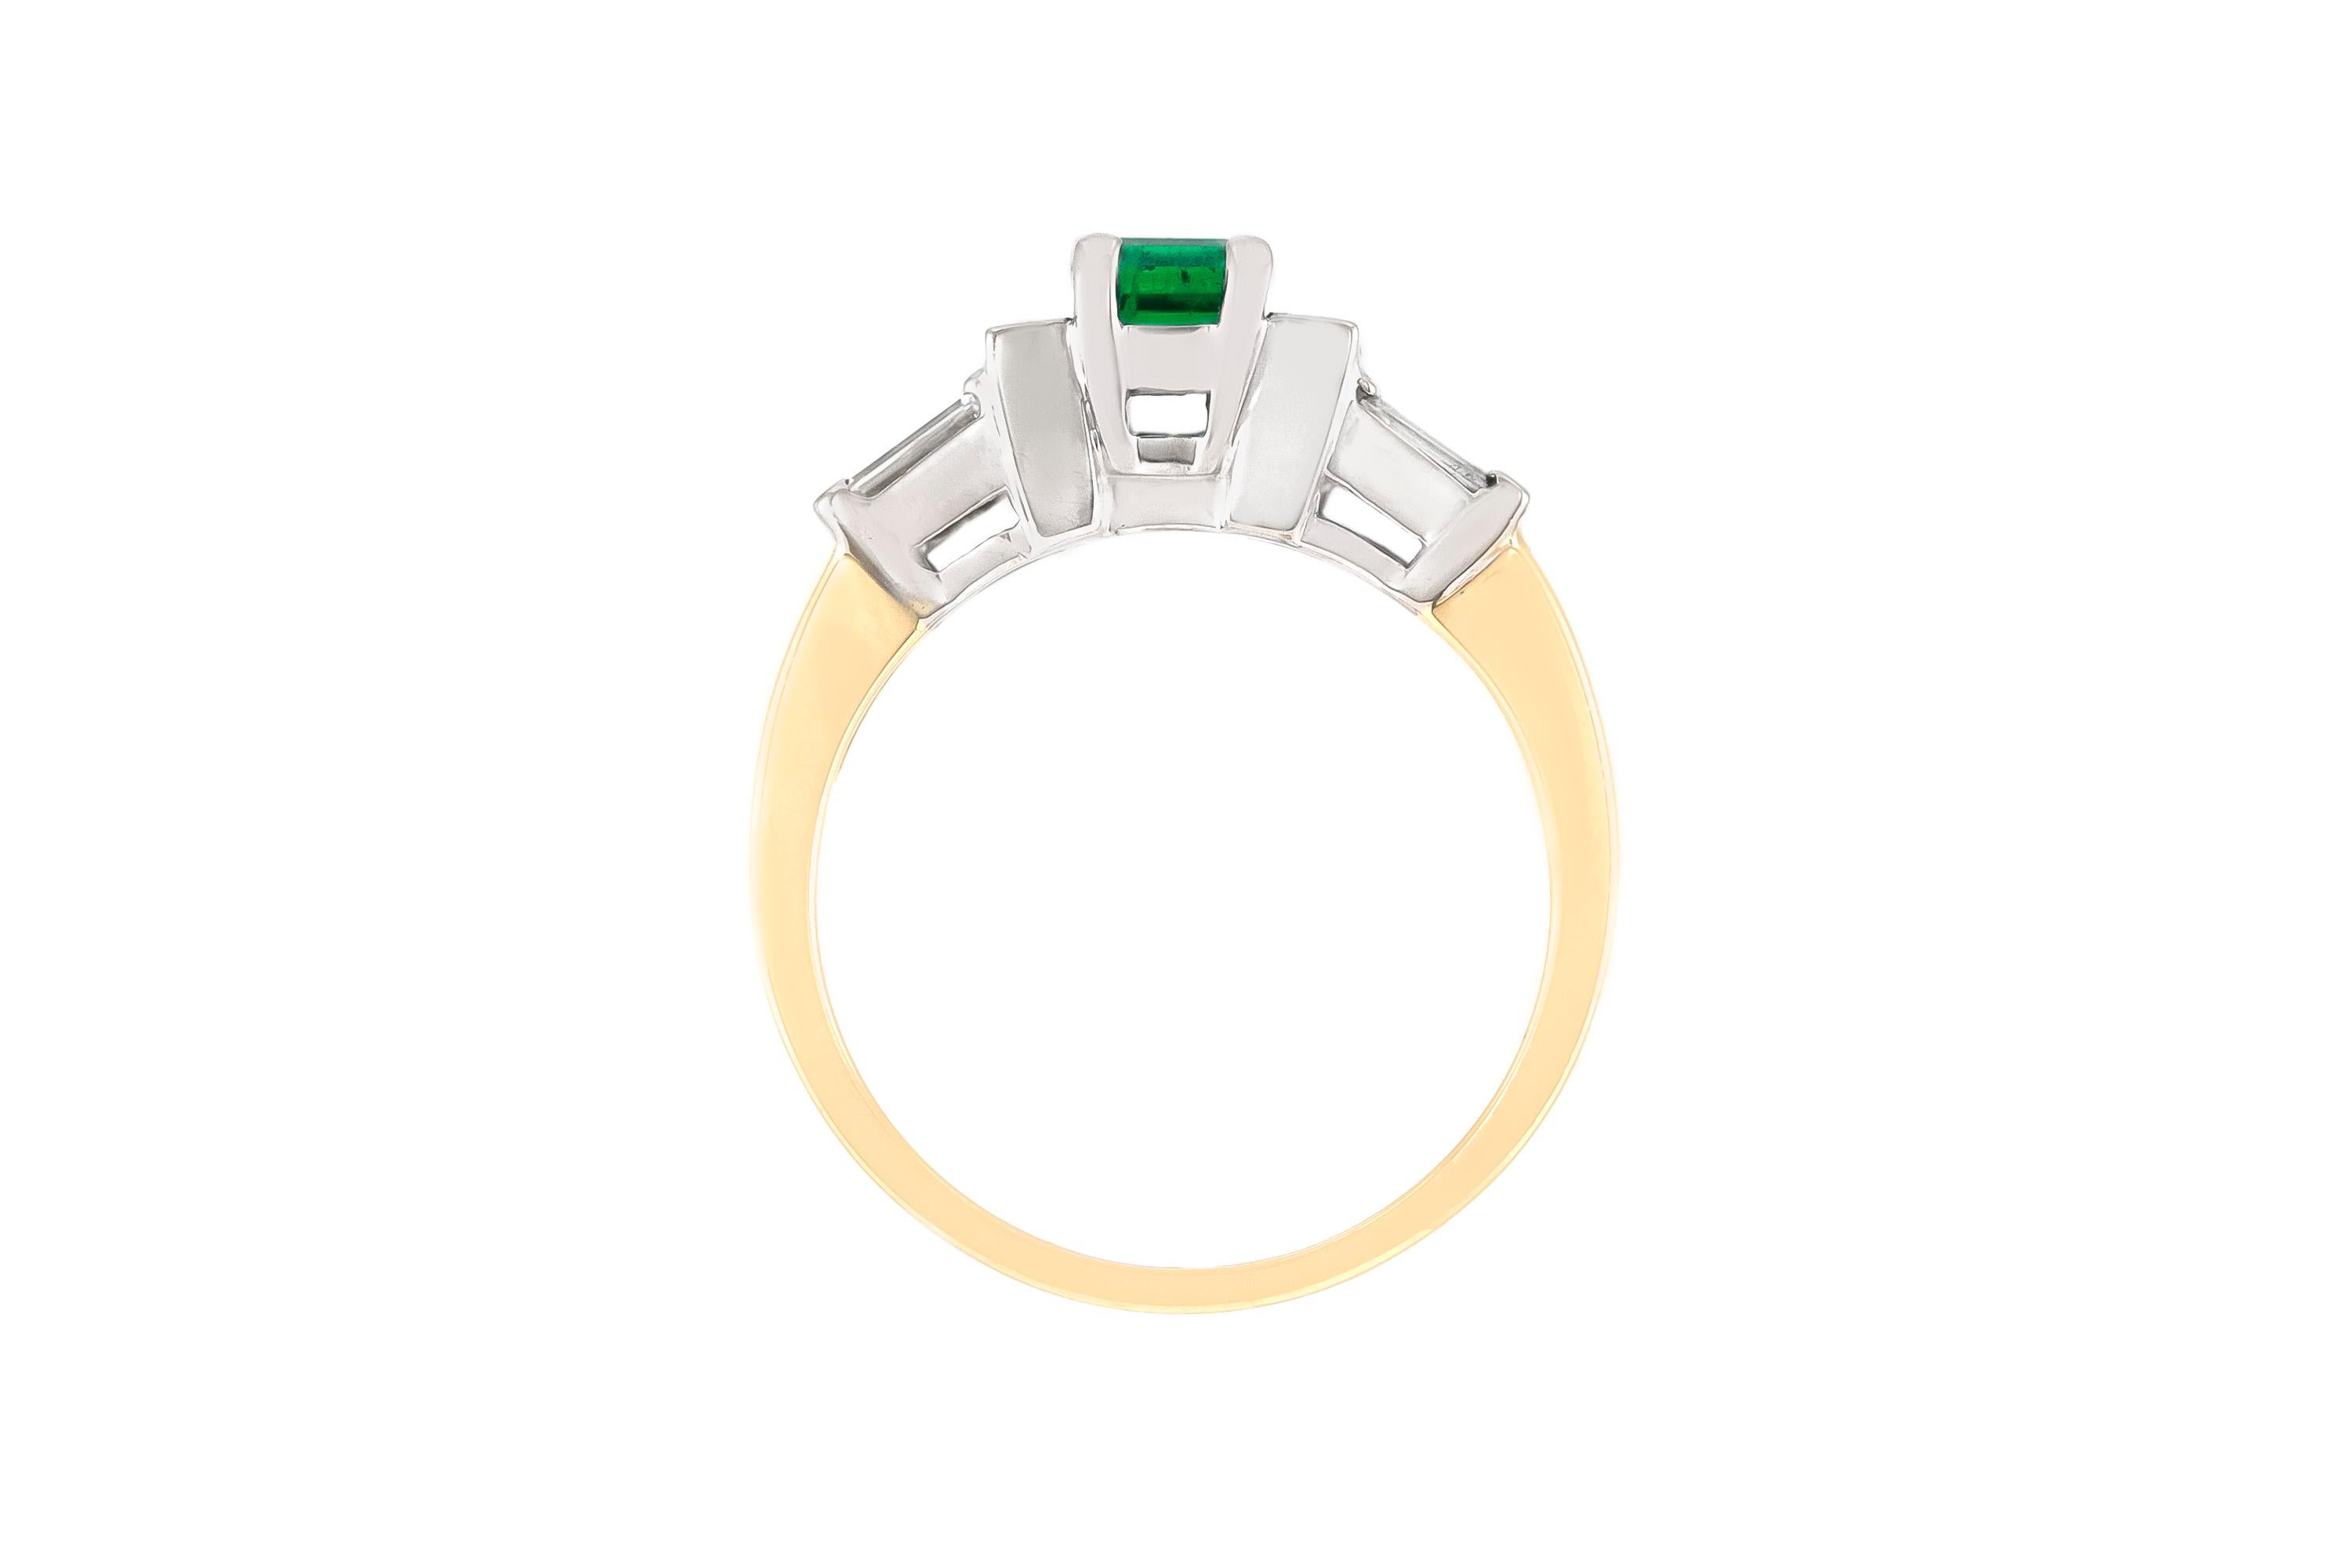 The ring is finely crafted in 18k yellow gold with center emerald weighing approximately total of 0.50 carat and diamonds weighing approximately total of 0.20 carat.
Circa 1940.